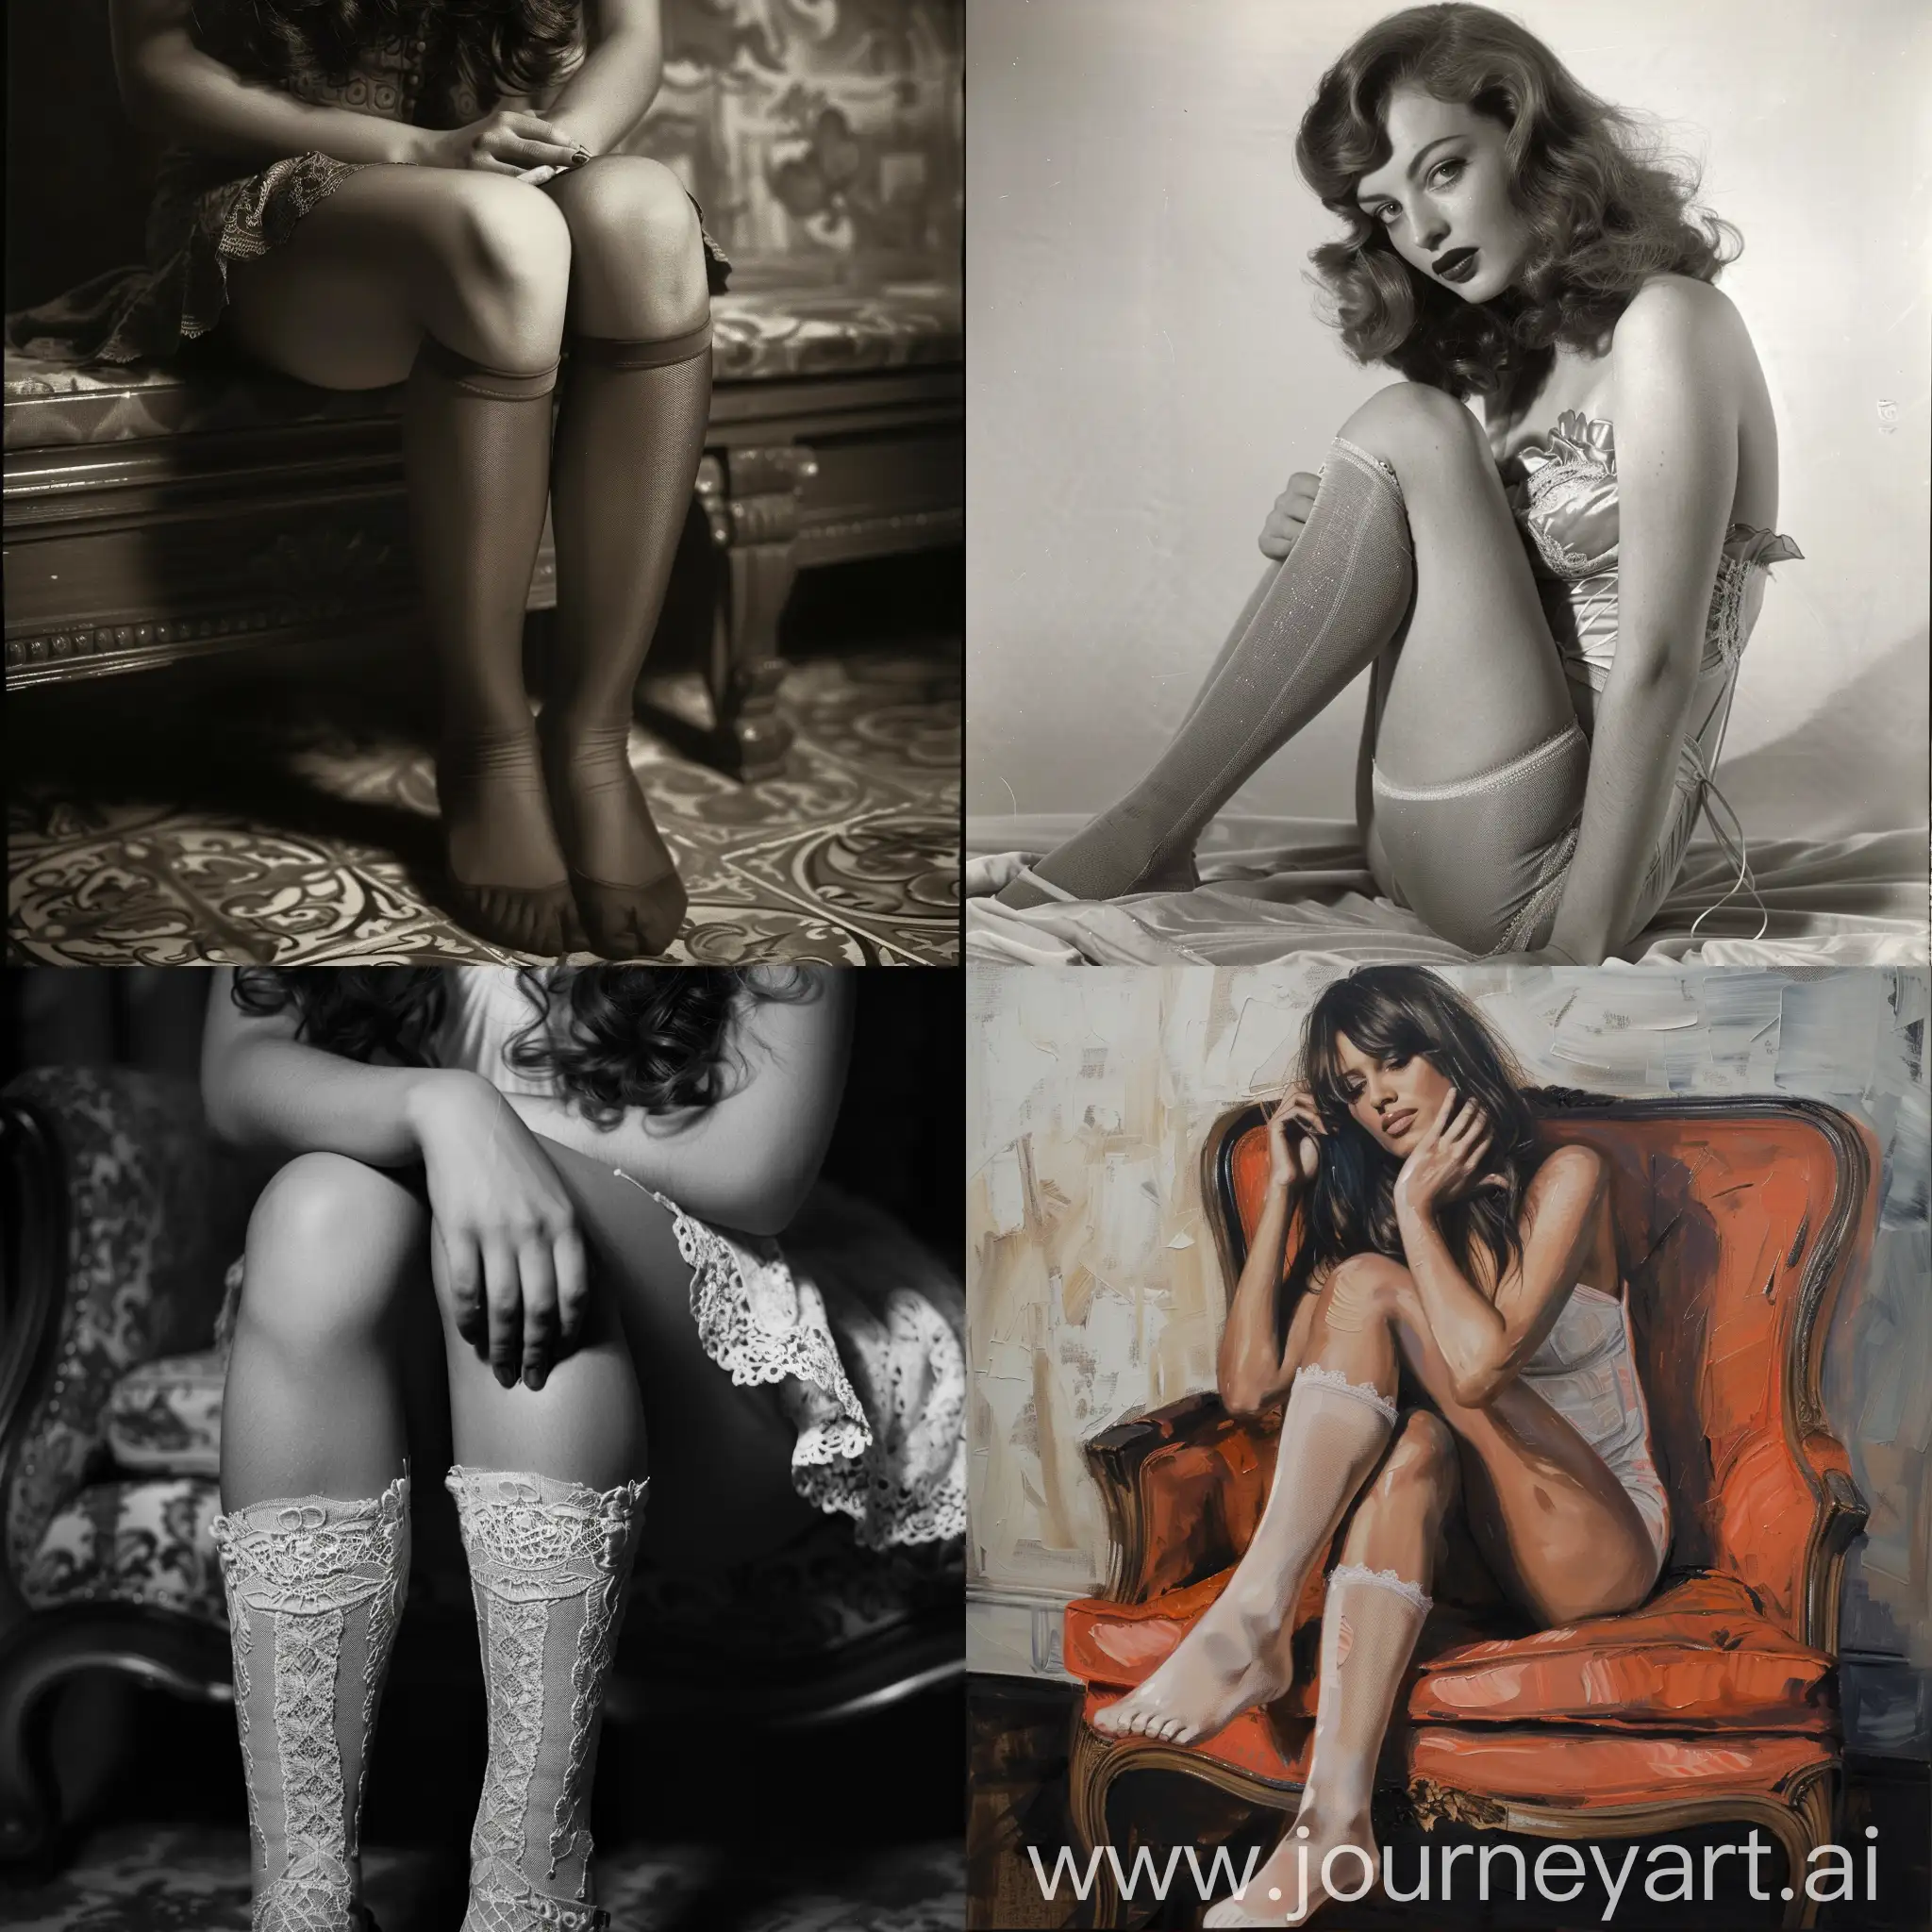 Elegant-Woman-in-Stockings-Captivating-Beauty-in-a-Vintage-Setting